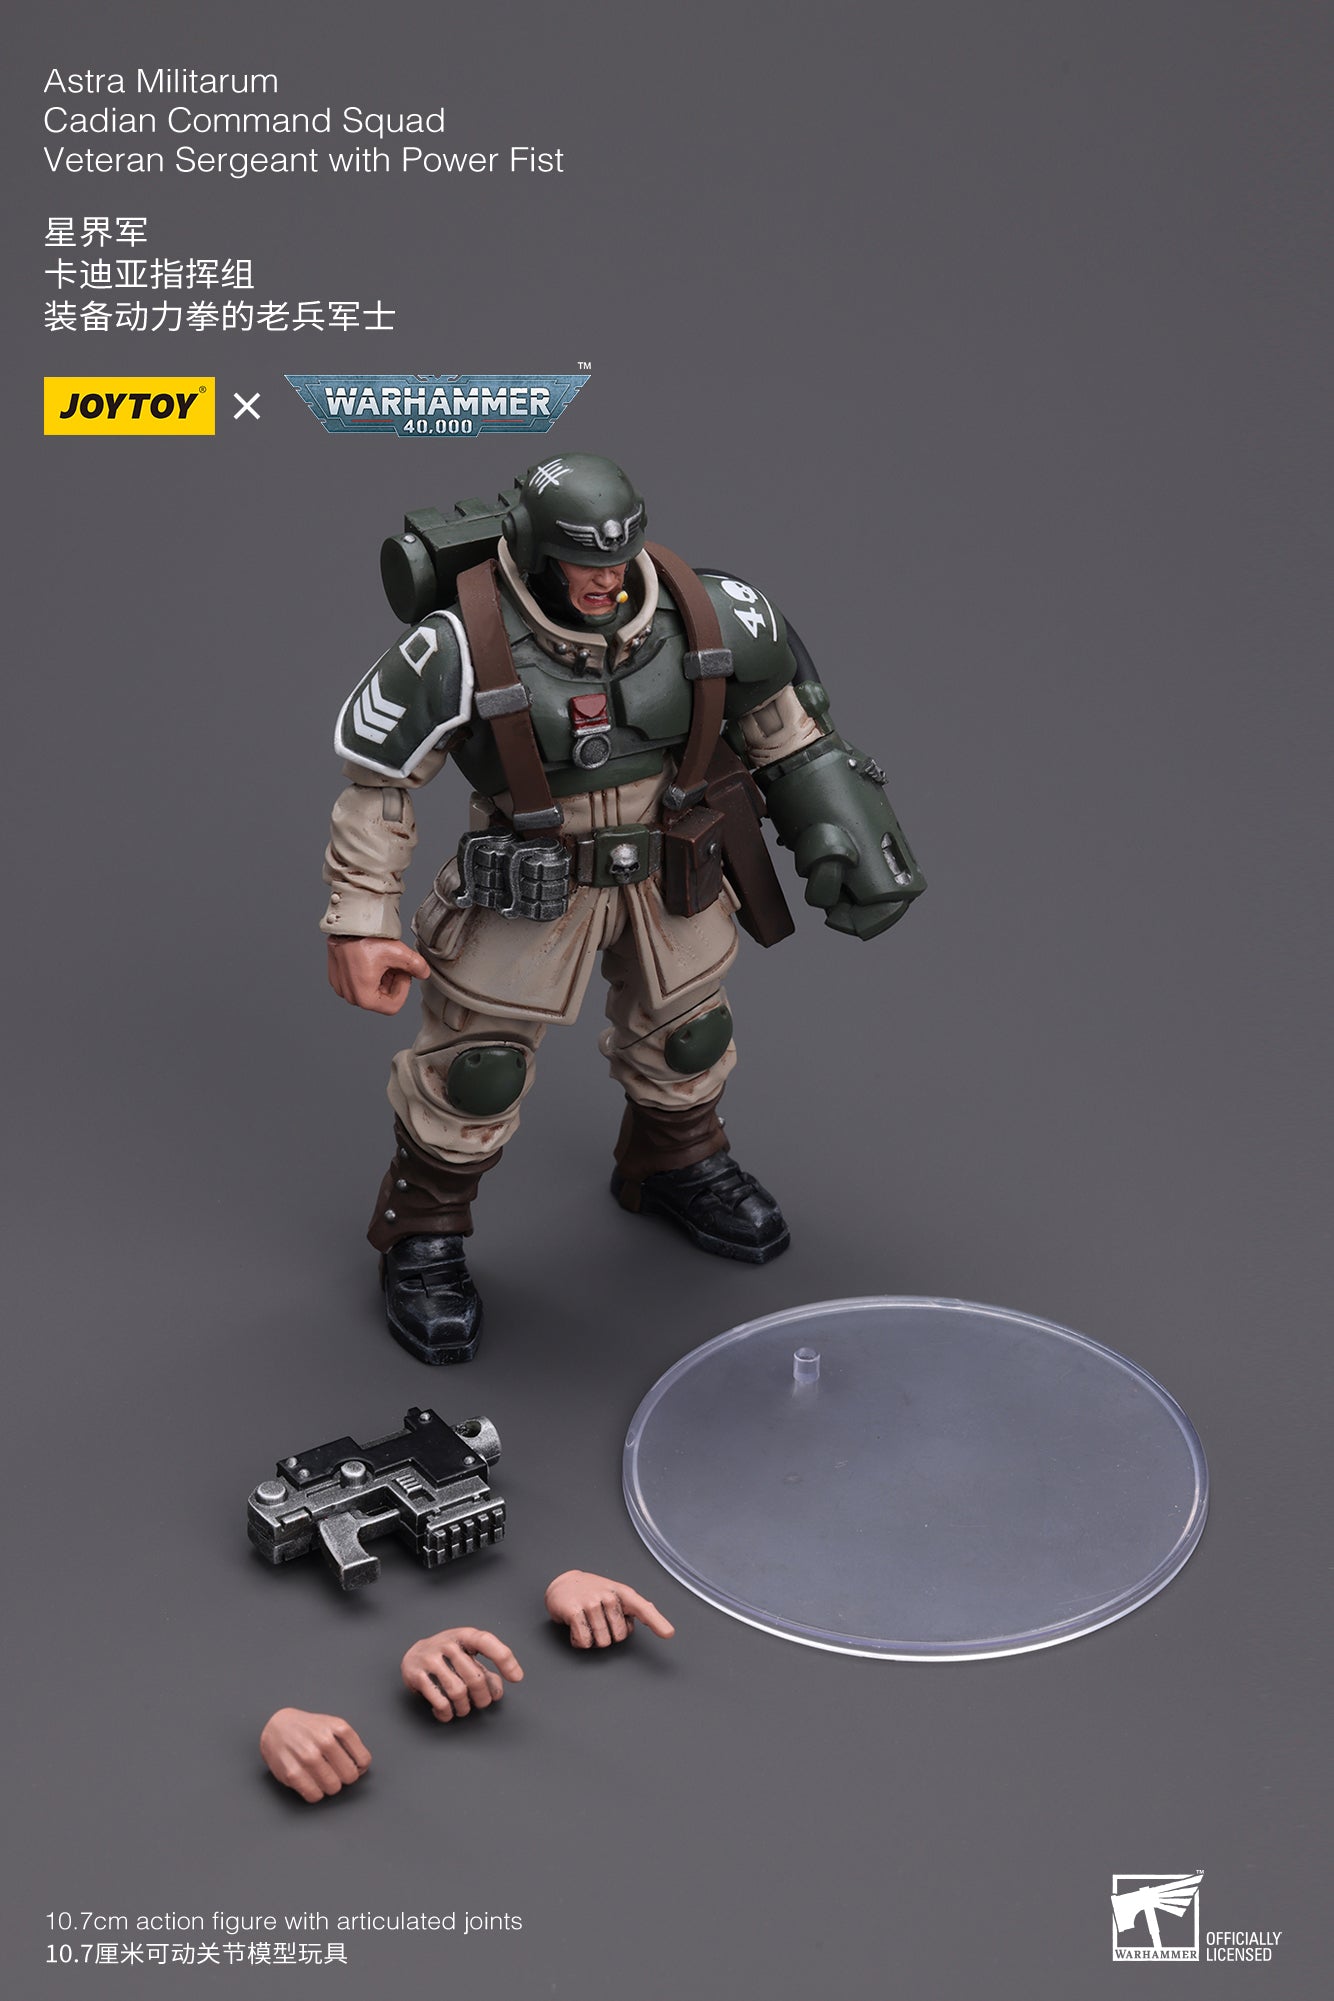 Astra Militarum Cadian Command Squad Veteran Sergeant with Power Fist - Warhammer 40K Action Figure By JOYTOY